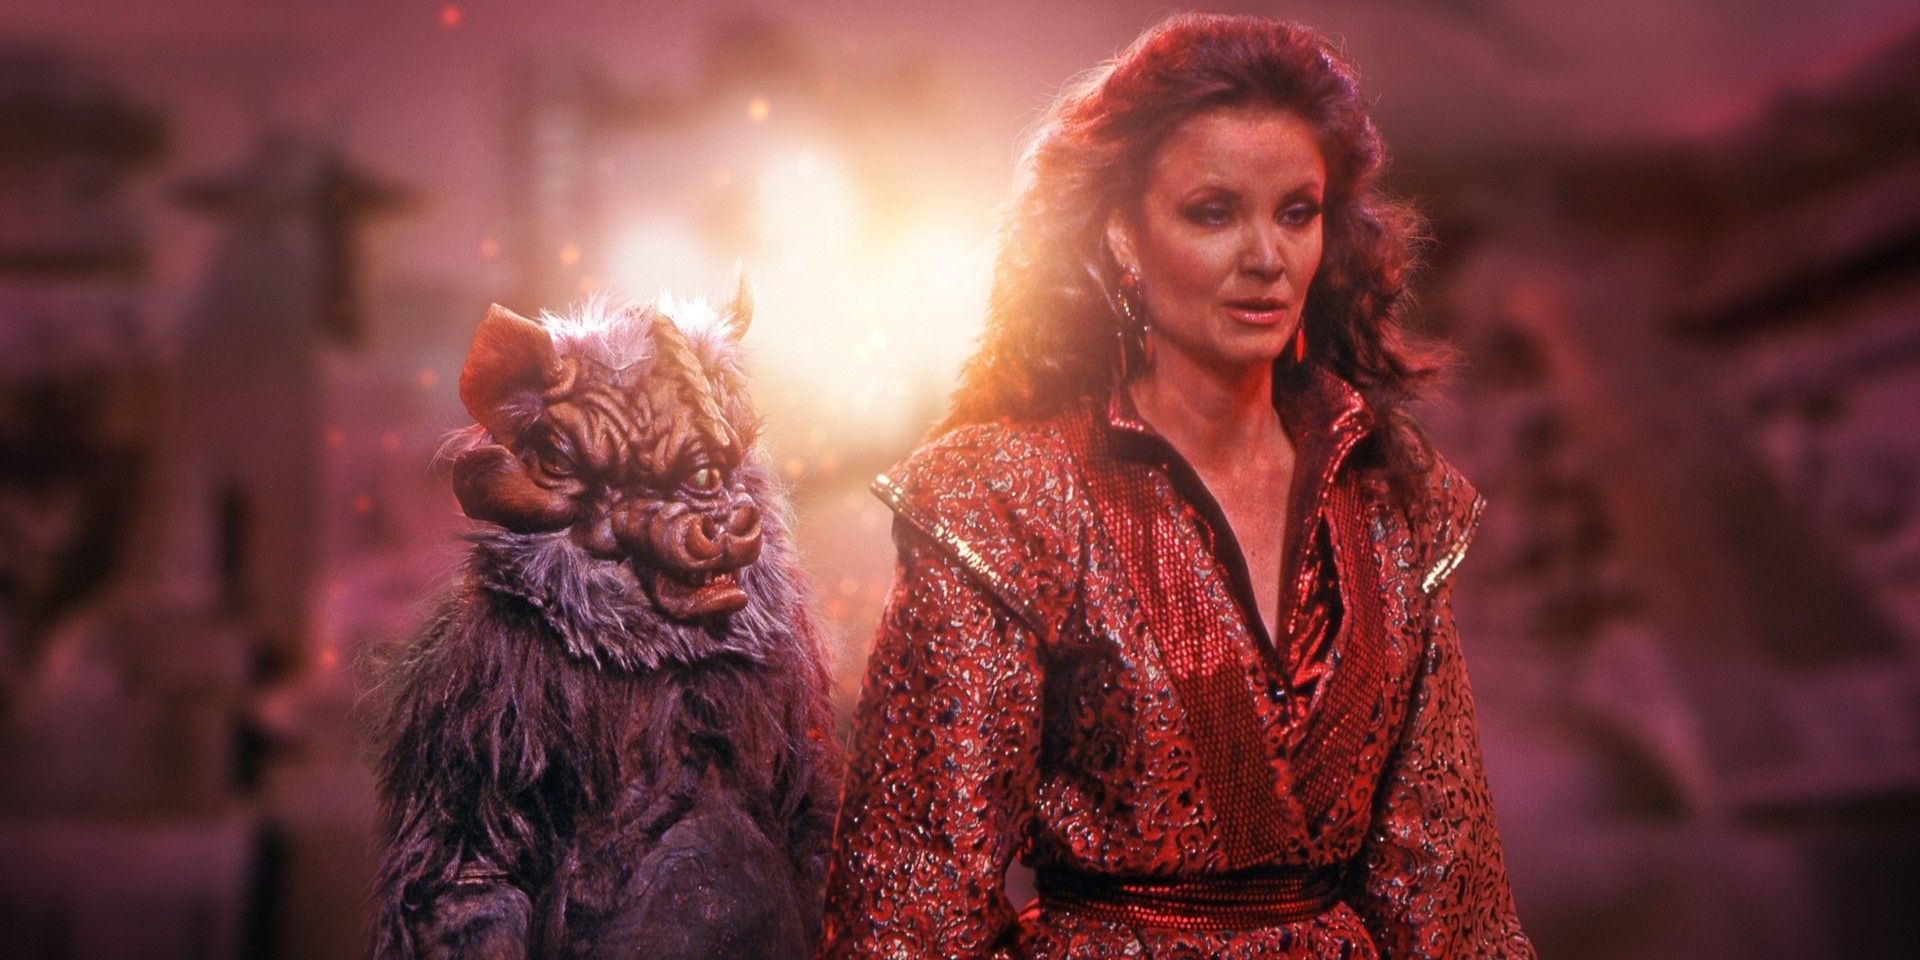 A Tetrap standing behind the Rani (Kate O'Mara) against a blurry red background in Doctor Who.